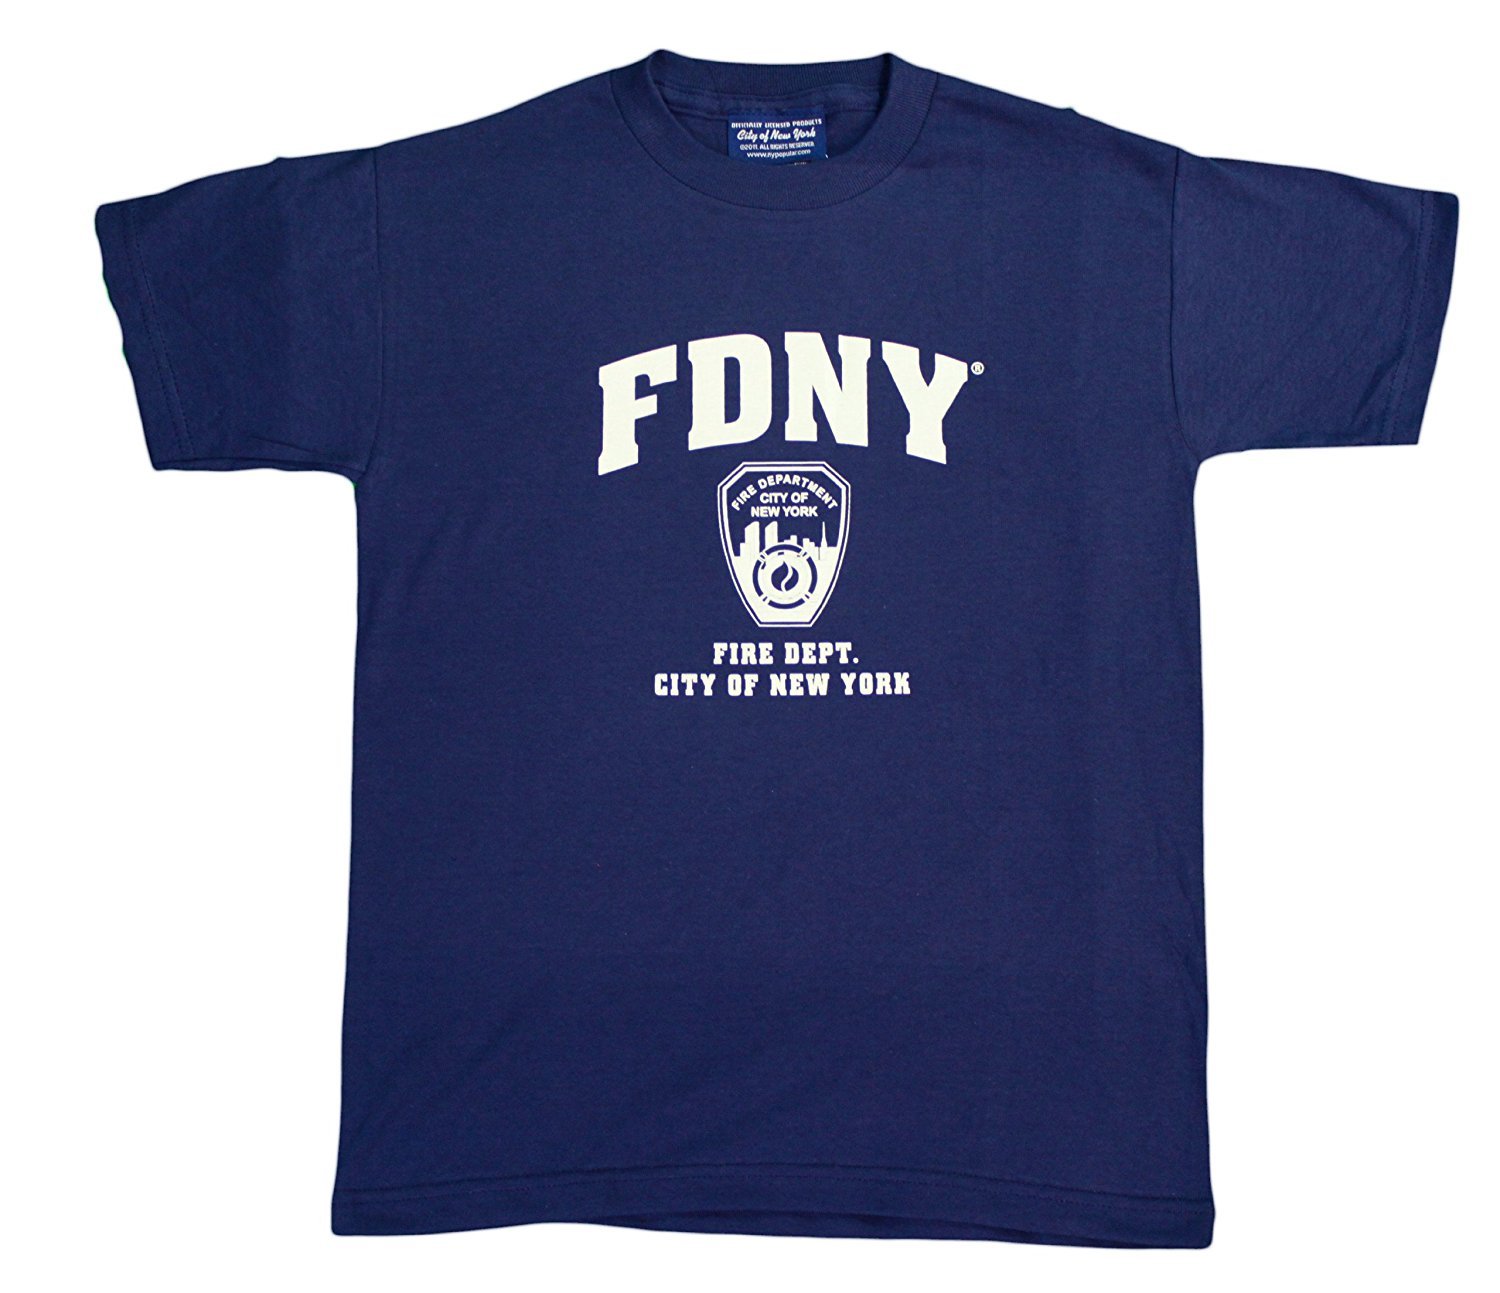 FDNY Youth Tee Kids T-Shirt Navy Blue White